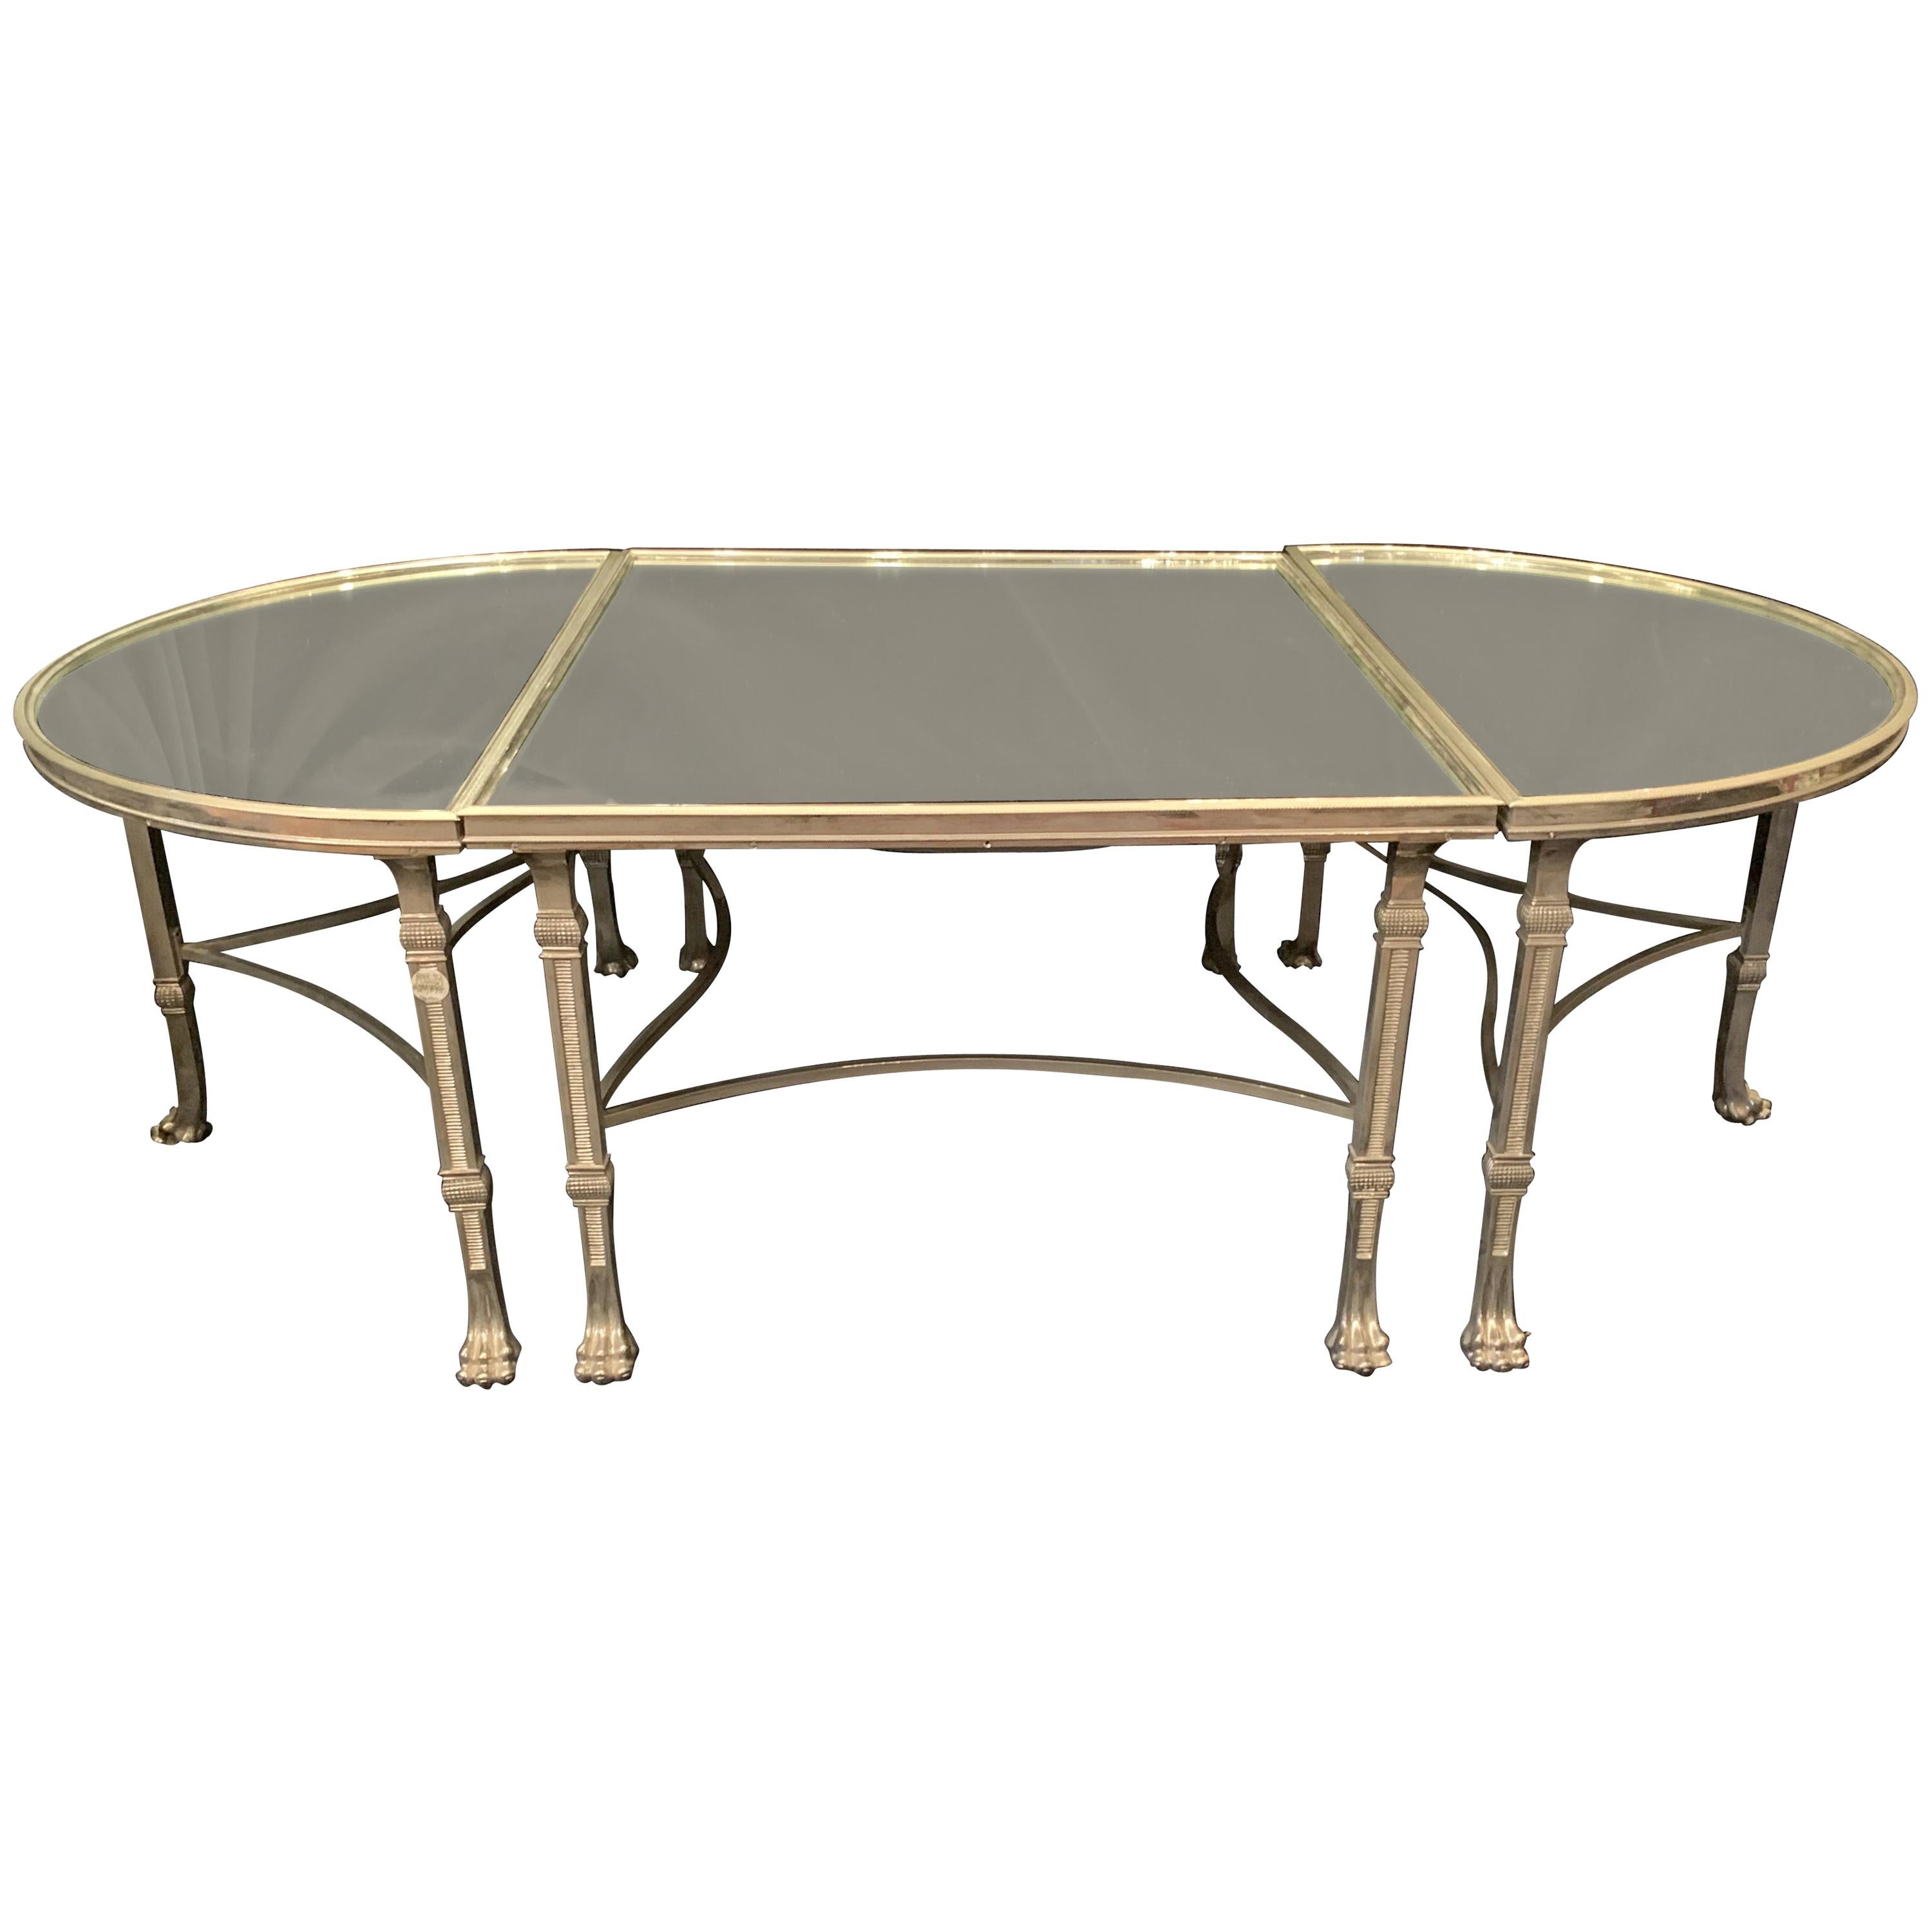 Wonderful French Polished Nickel Bronze Mirror Three Part Cocktail Coffee Table